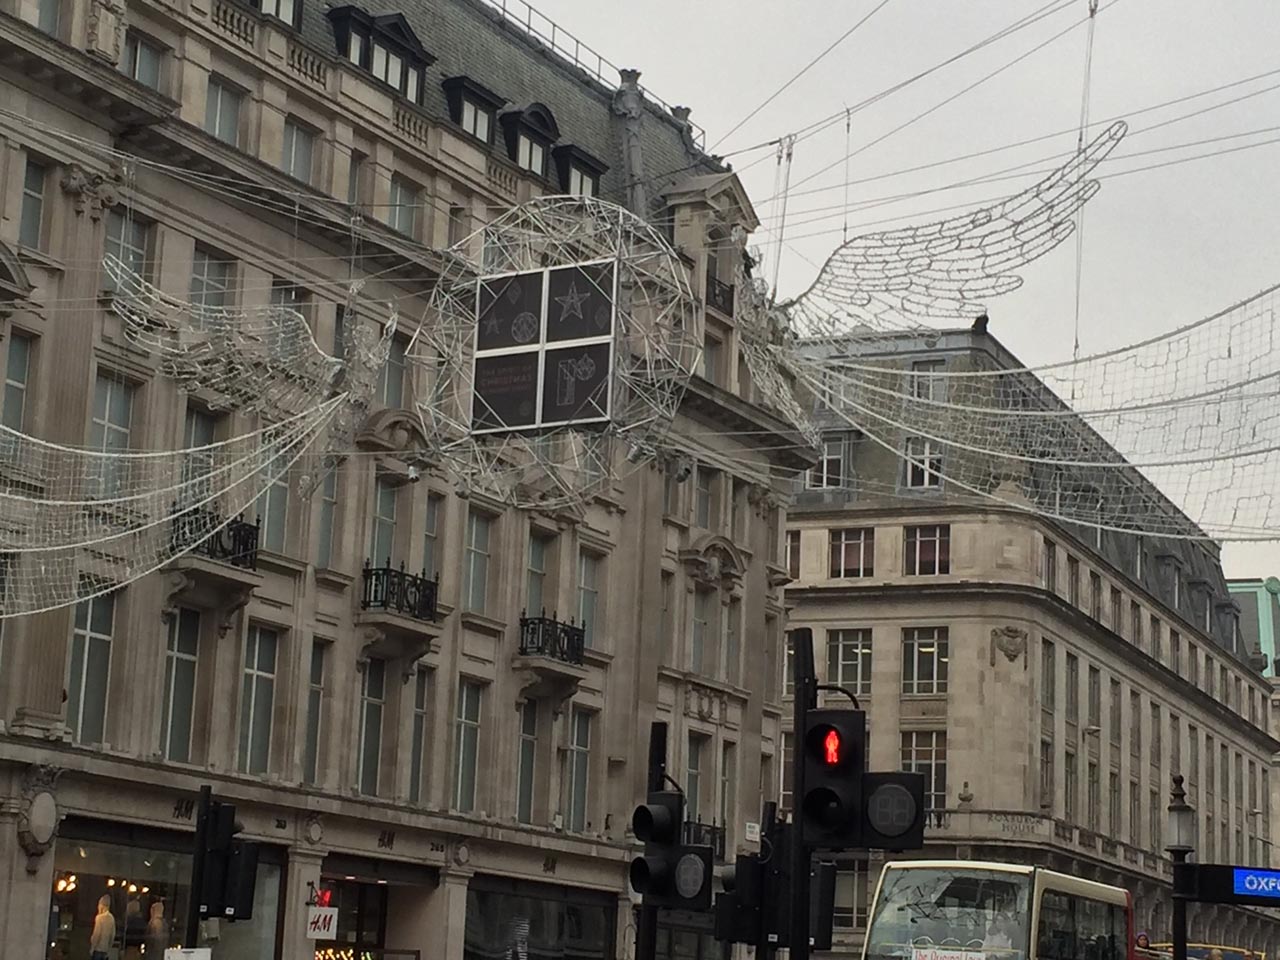 Photo of our netting in use on Christmas lighting installations on Regent Street.